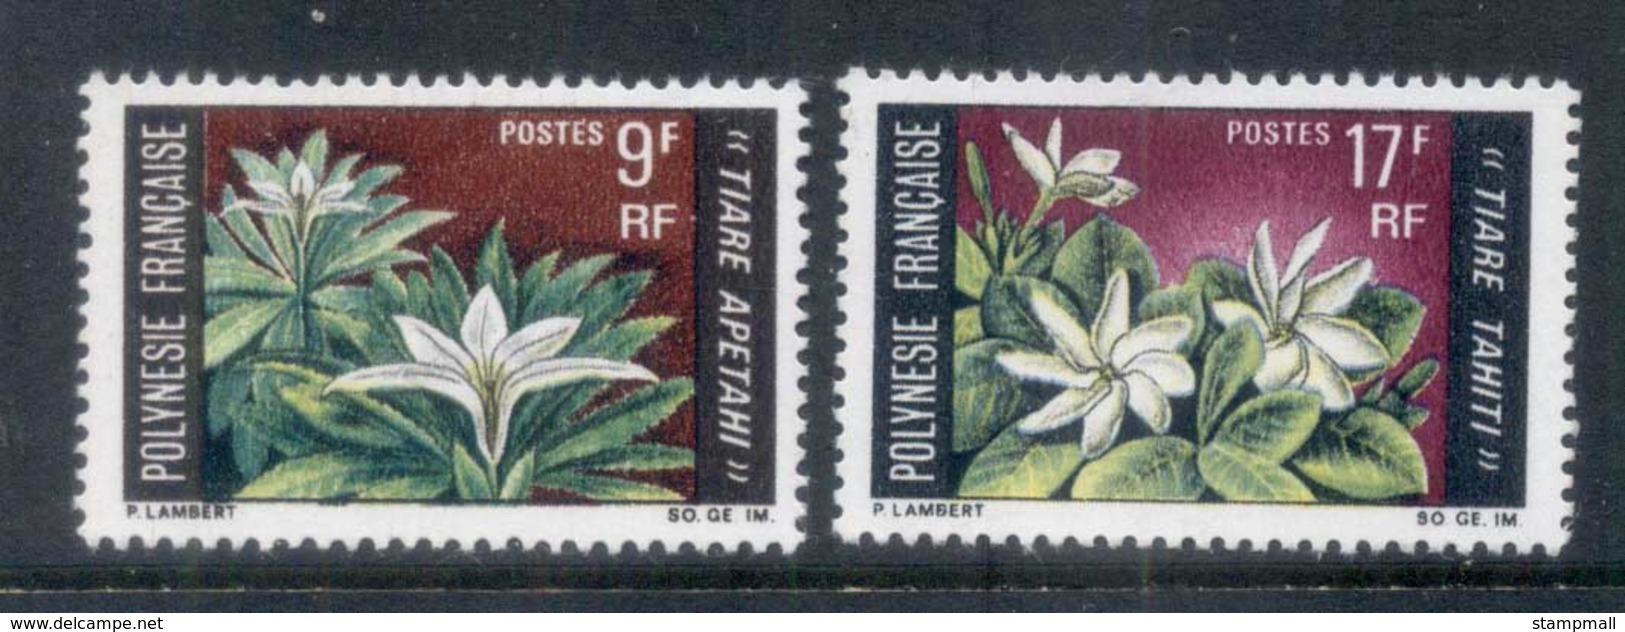 French Polynesia 1969 Flowers MUH - Unused Stamps